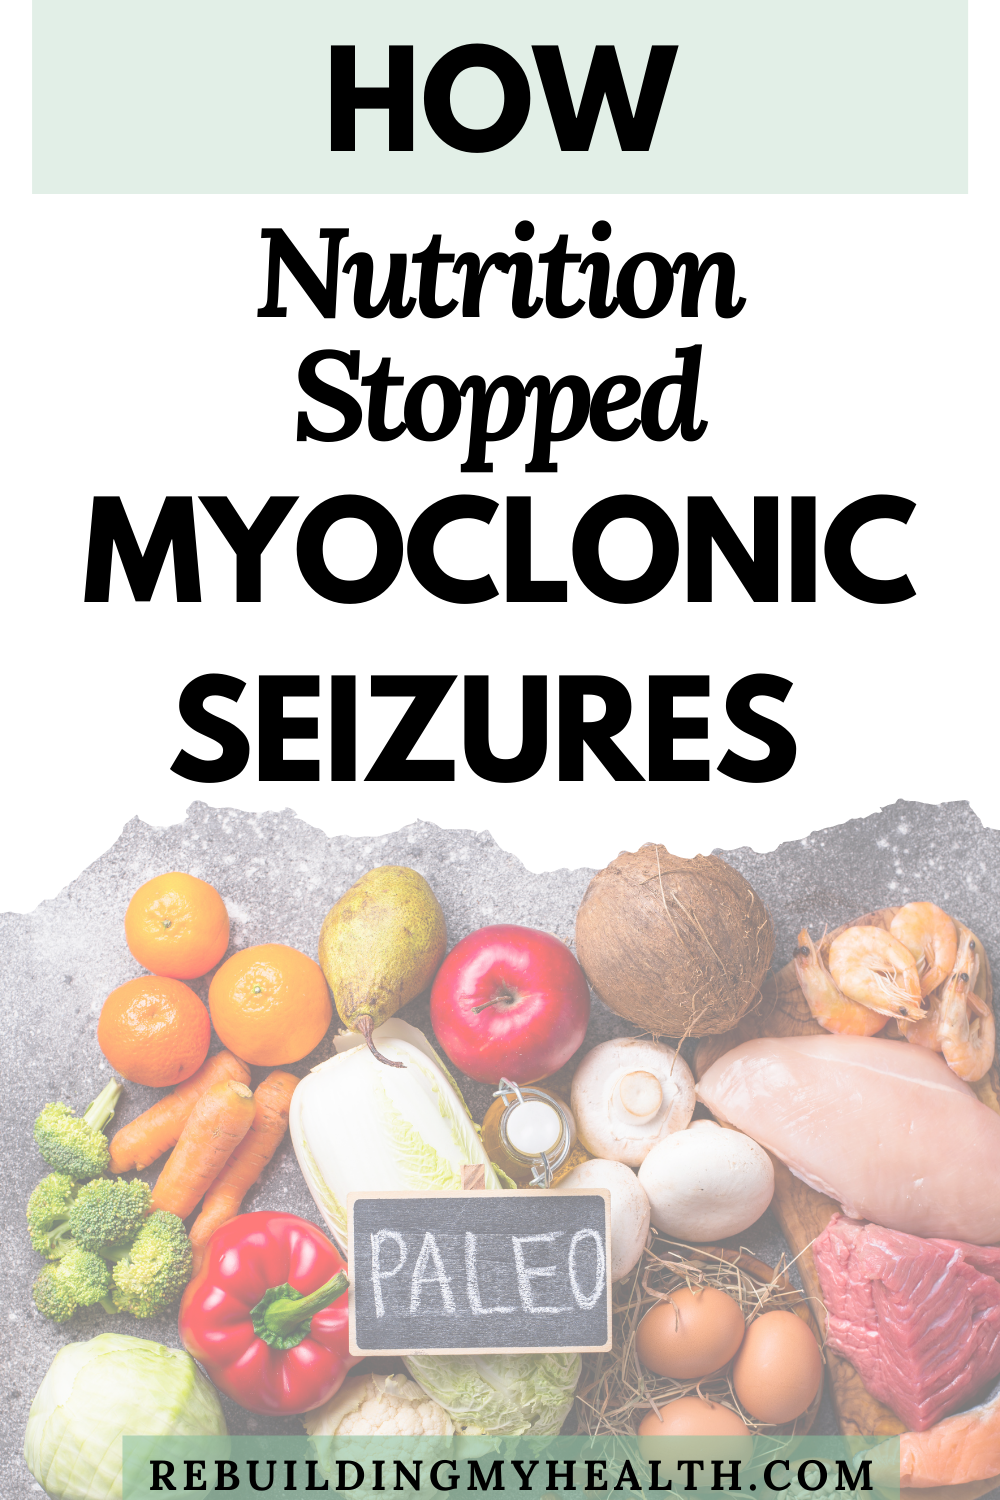 To stop myoclonic seizures, Alden's family switched to a paleo diet plus eliminated specific trigger foods for him, such as nightshades.